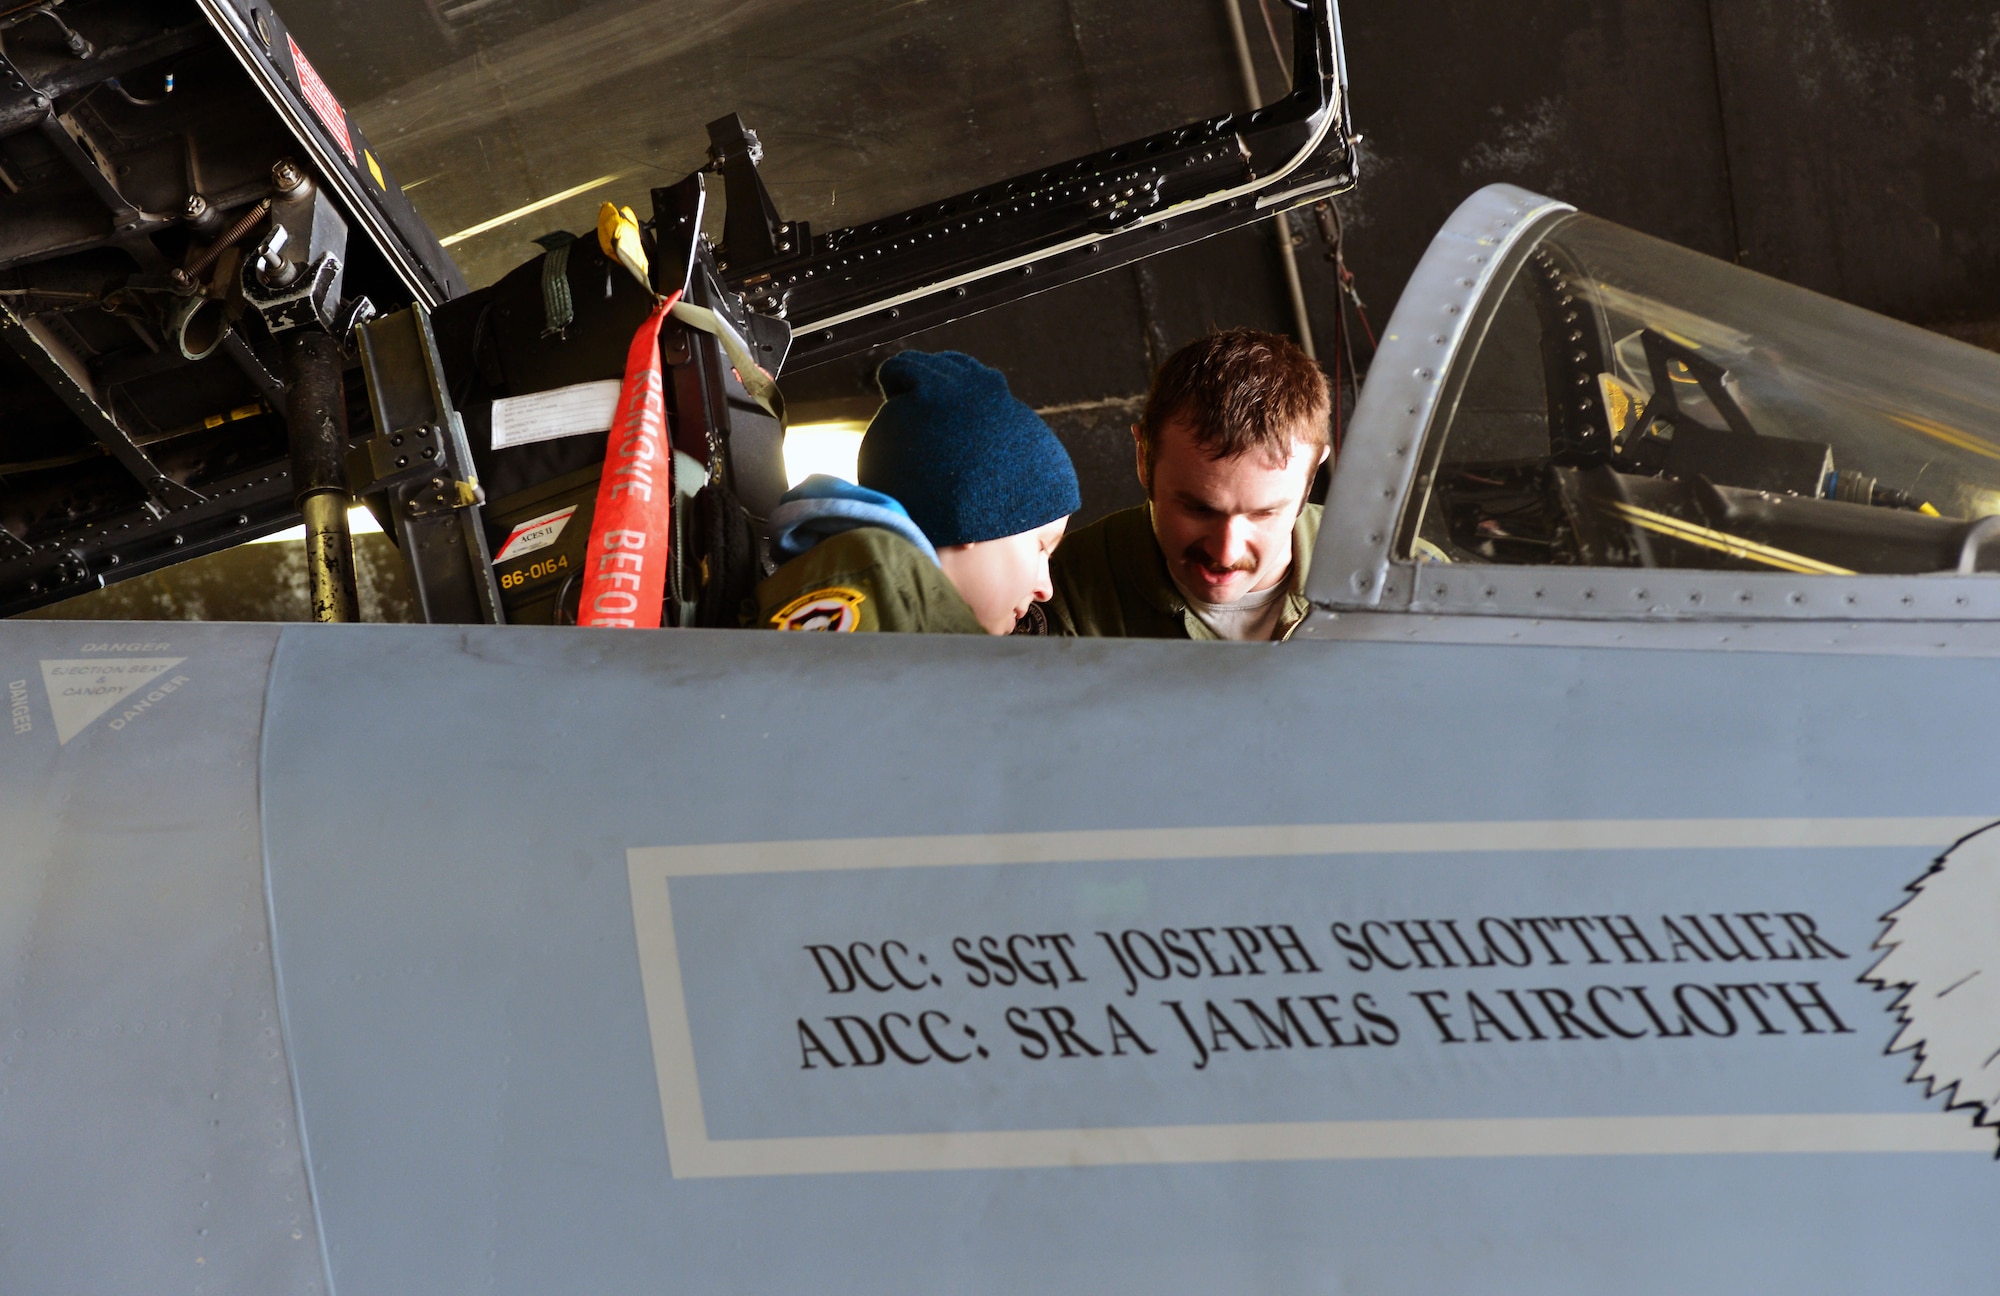 U.S. Air Force Captain Jason Ford, 871st Air Expeditionary Squadron F-15C Eagle fighter aircraft pilot, shows Gunnar Guðlaugsson the cockpit of an F-15C Eagle fighter aircraft during the Pilot for a Day program at Keflavik International Airport, Iceland, May 13, 2015.The final part of the program included a tour of one of the F-15Cs stationed at Keflavik for Icelandic Air Surveillance and Policing. (U.S. Air Force photo by 2nd Lt. Meredith Mulvihill/Released)